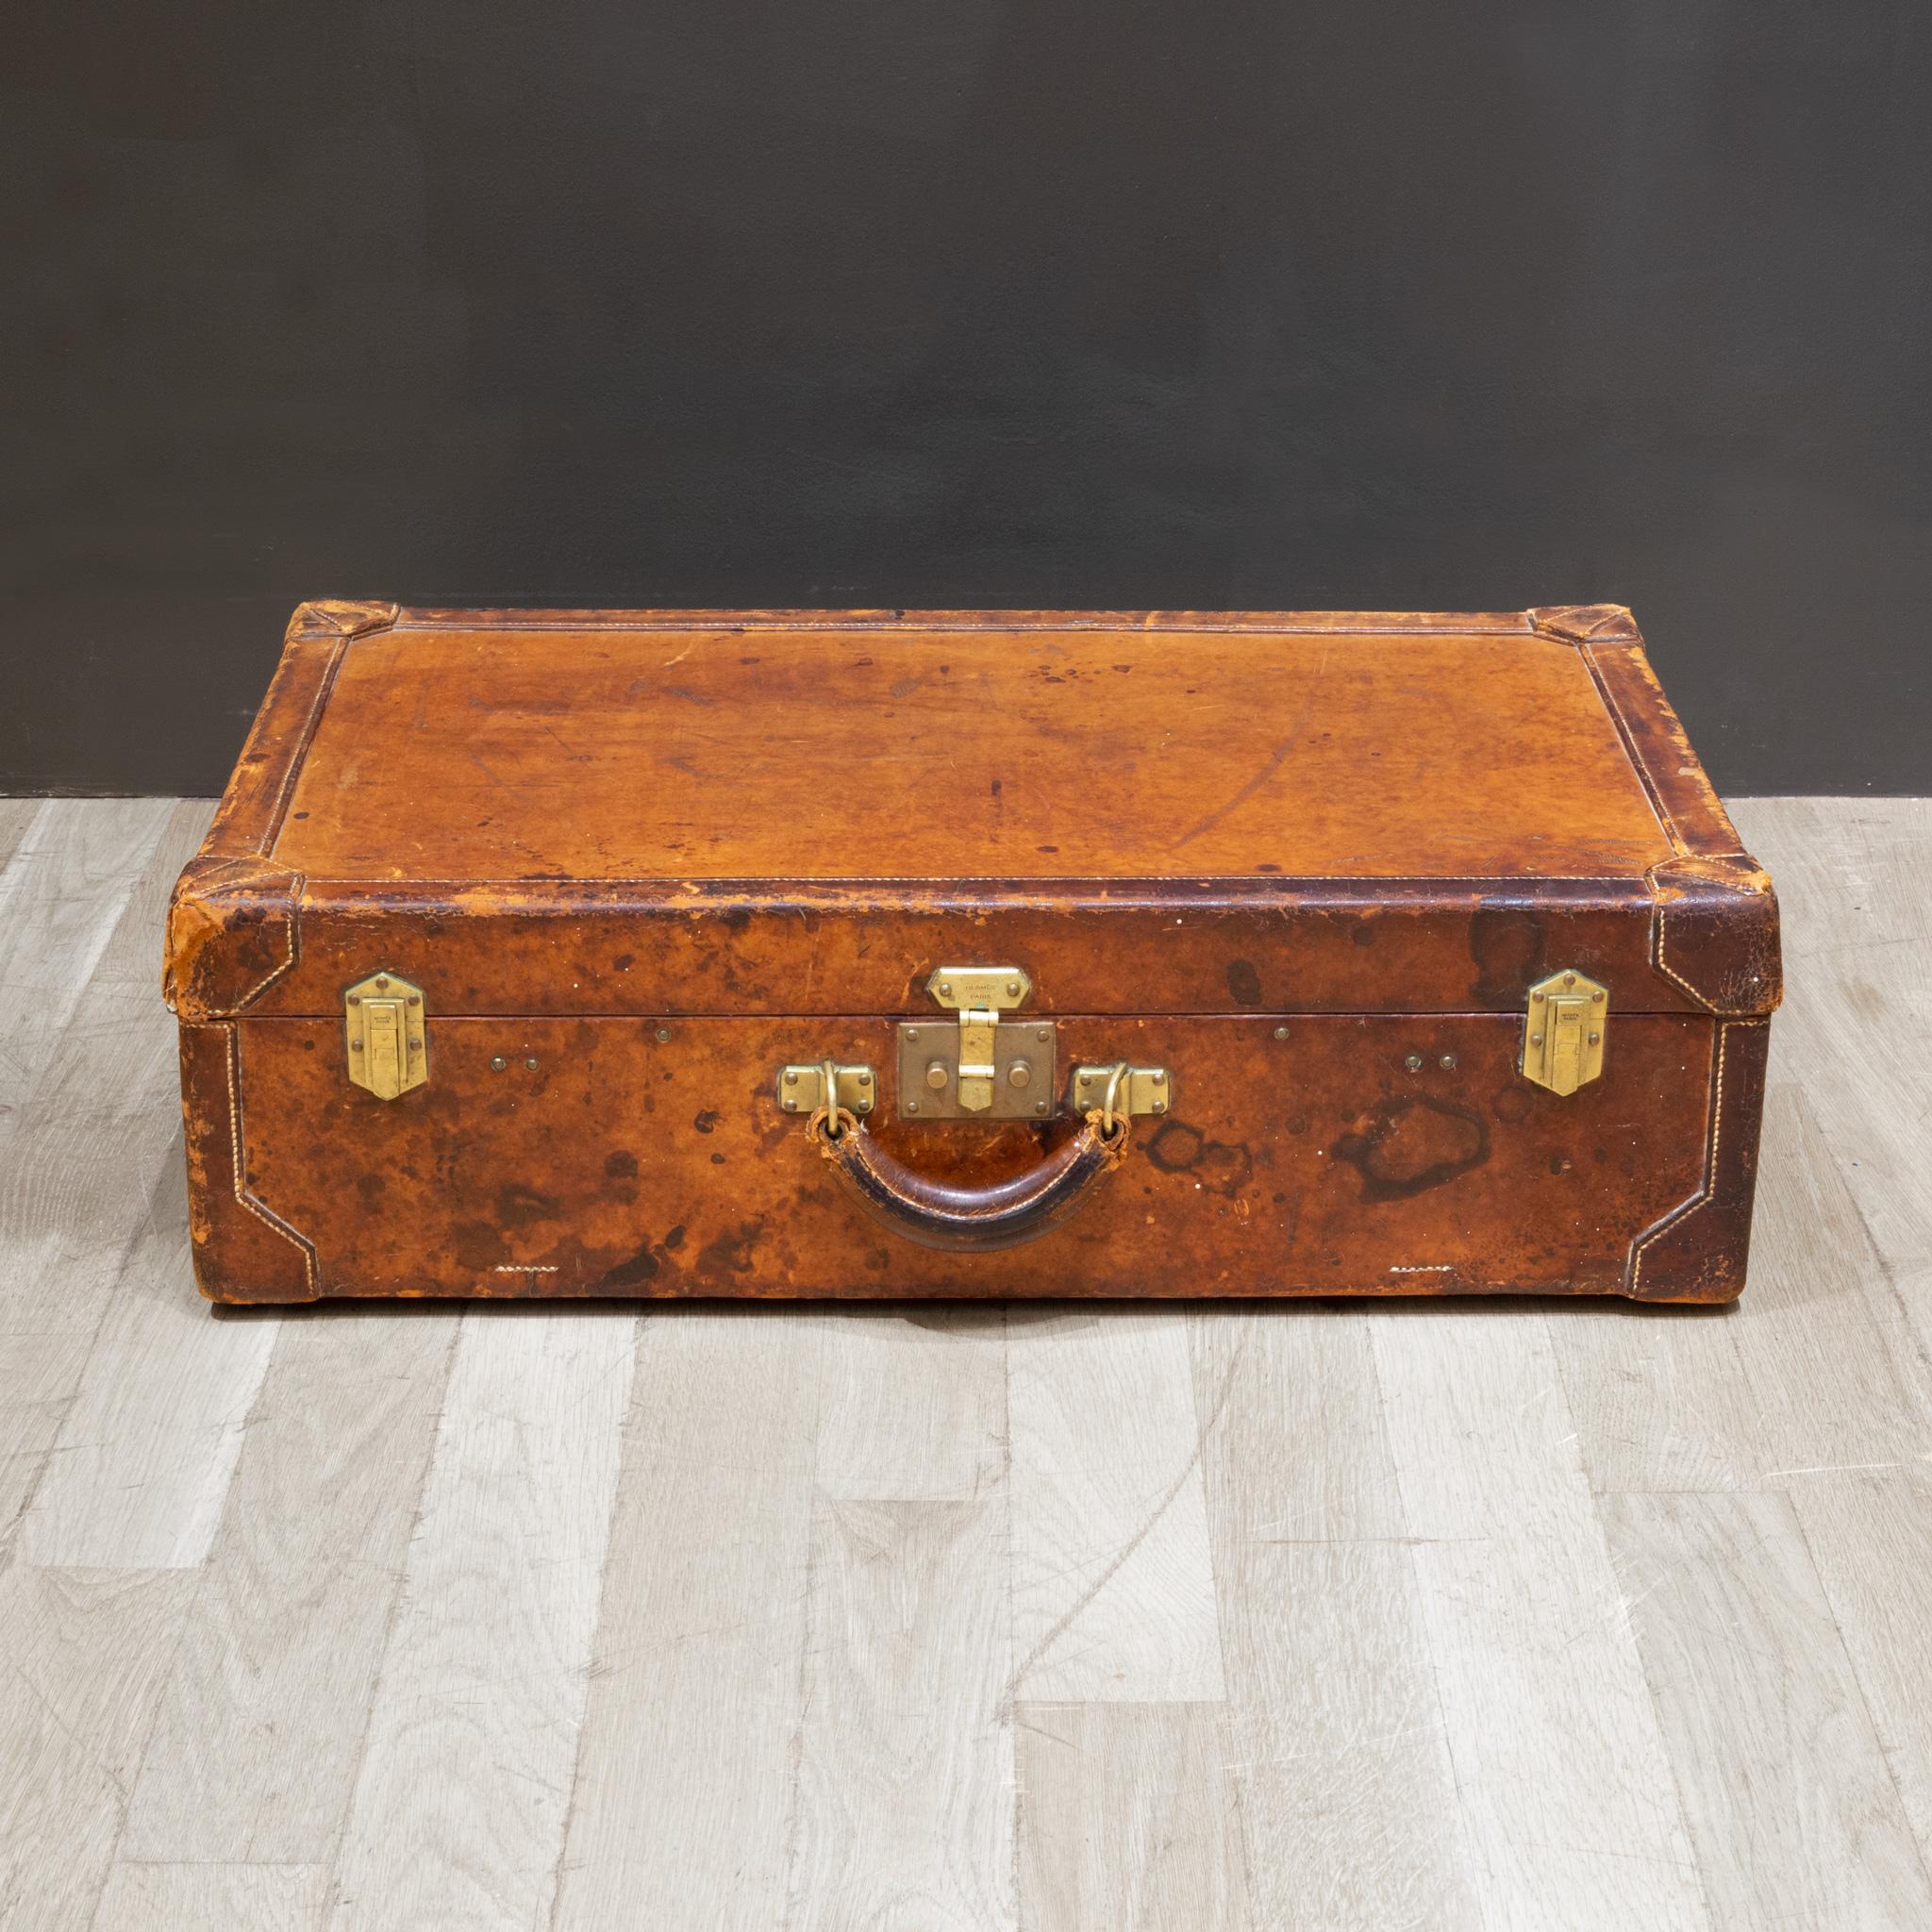 Hermes Paris Leather Suitcase c.1930 In Good Condition For Sale In San Francisco, CA